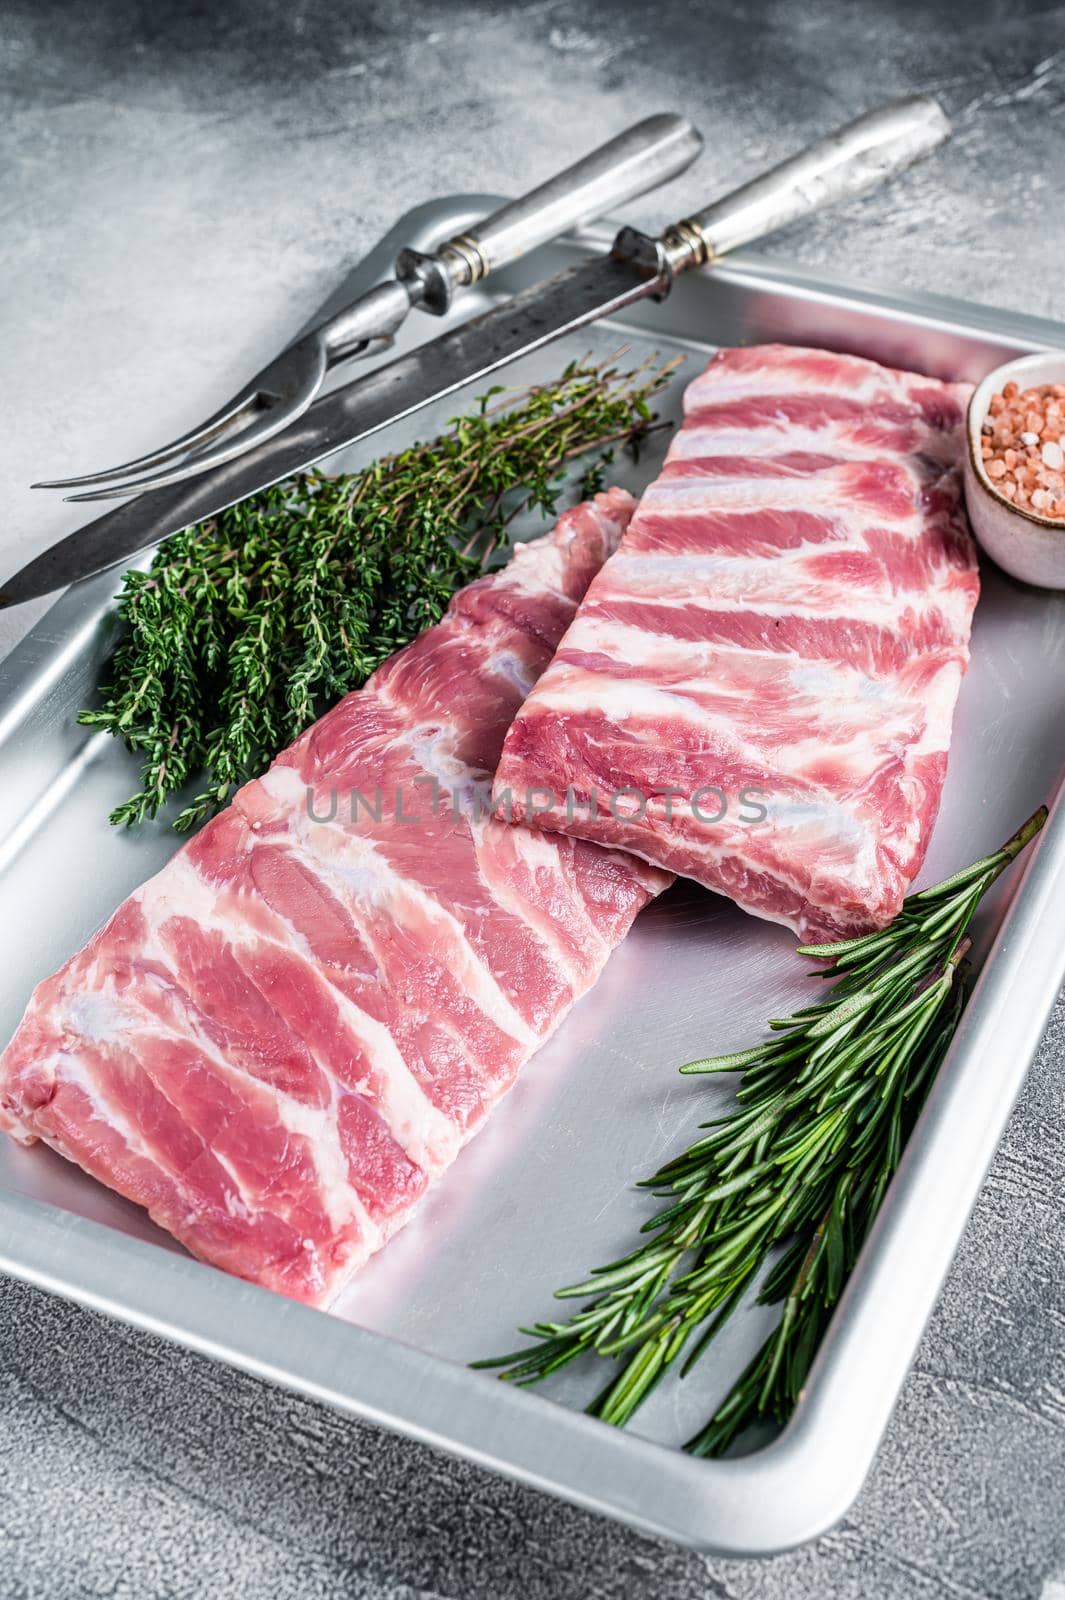 Rack of Raw pork spare ribs in kitchen oven tray with herbs. White background. Top view.